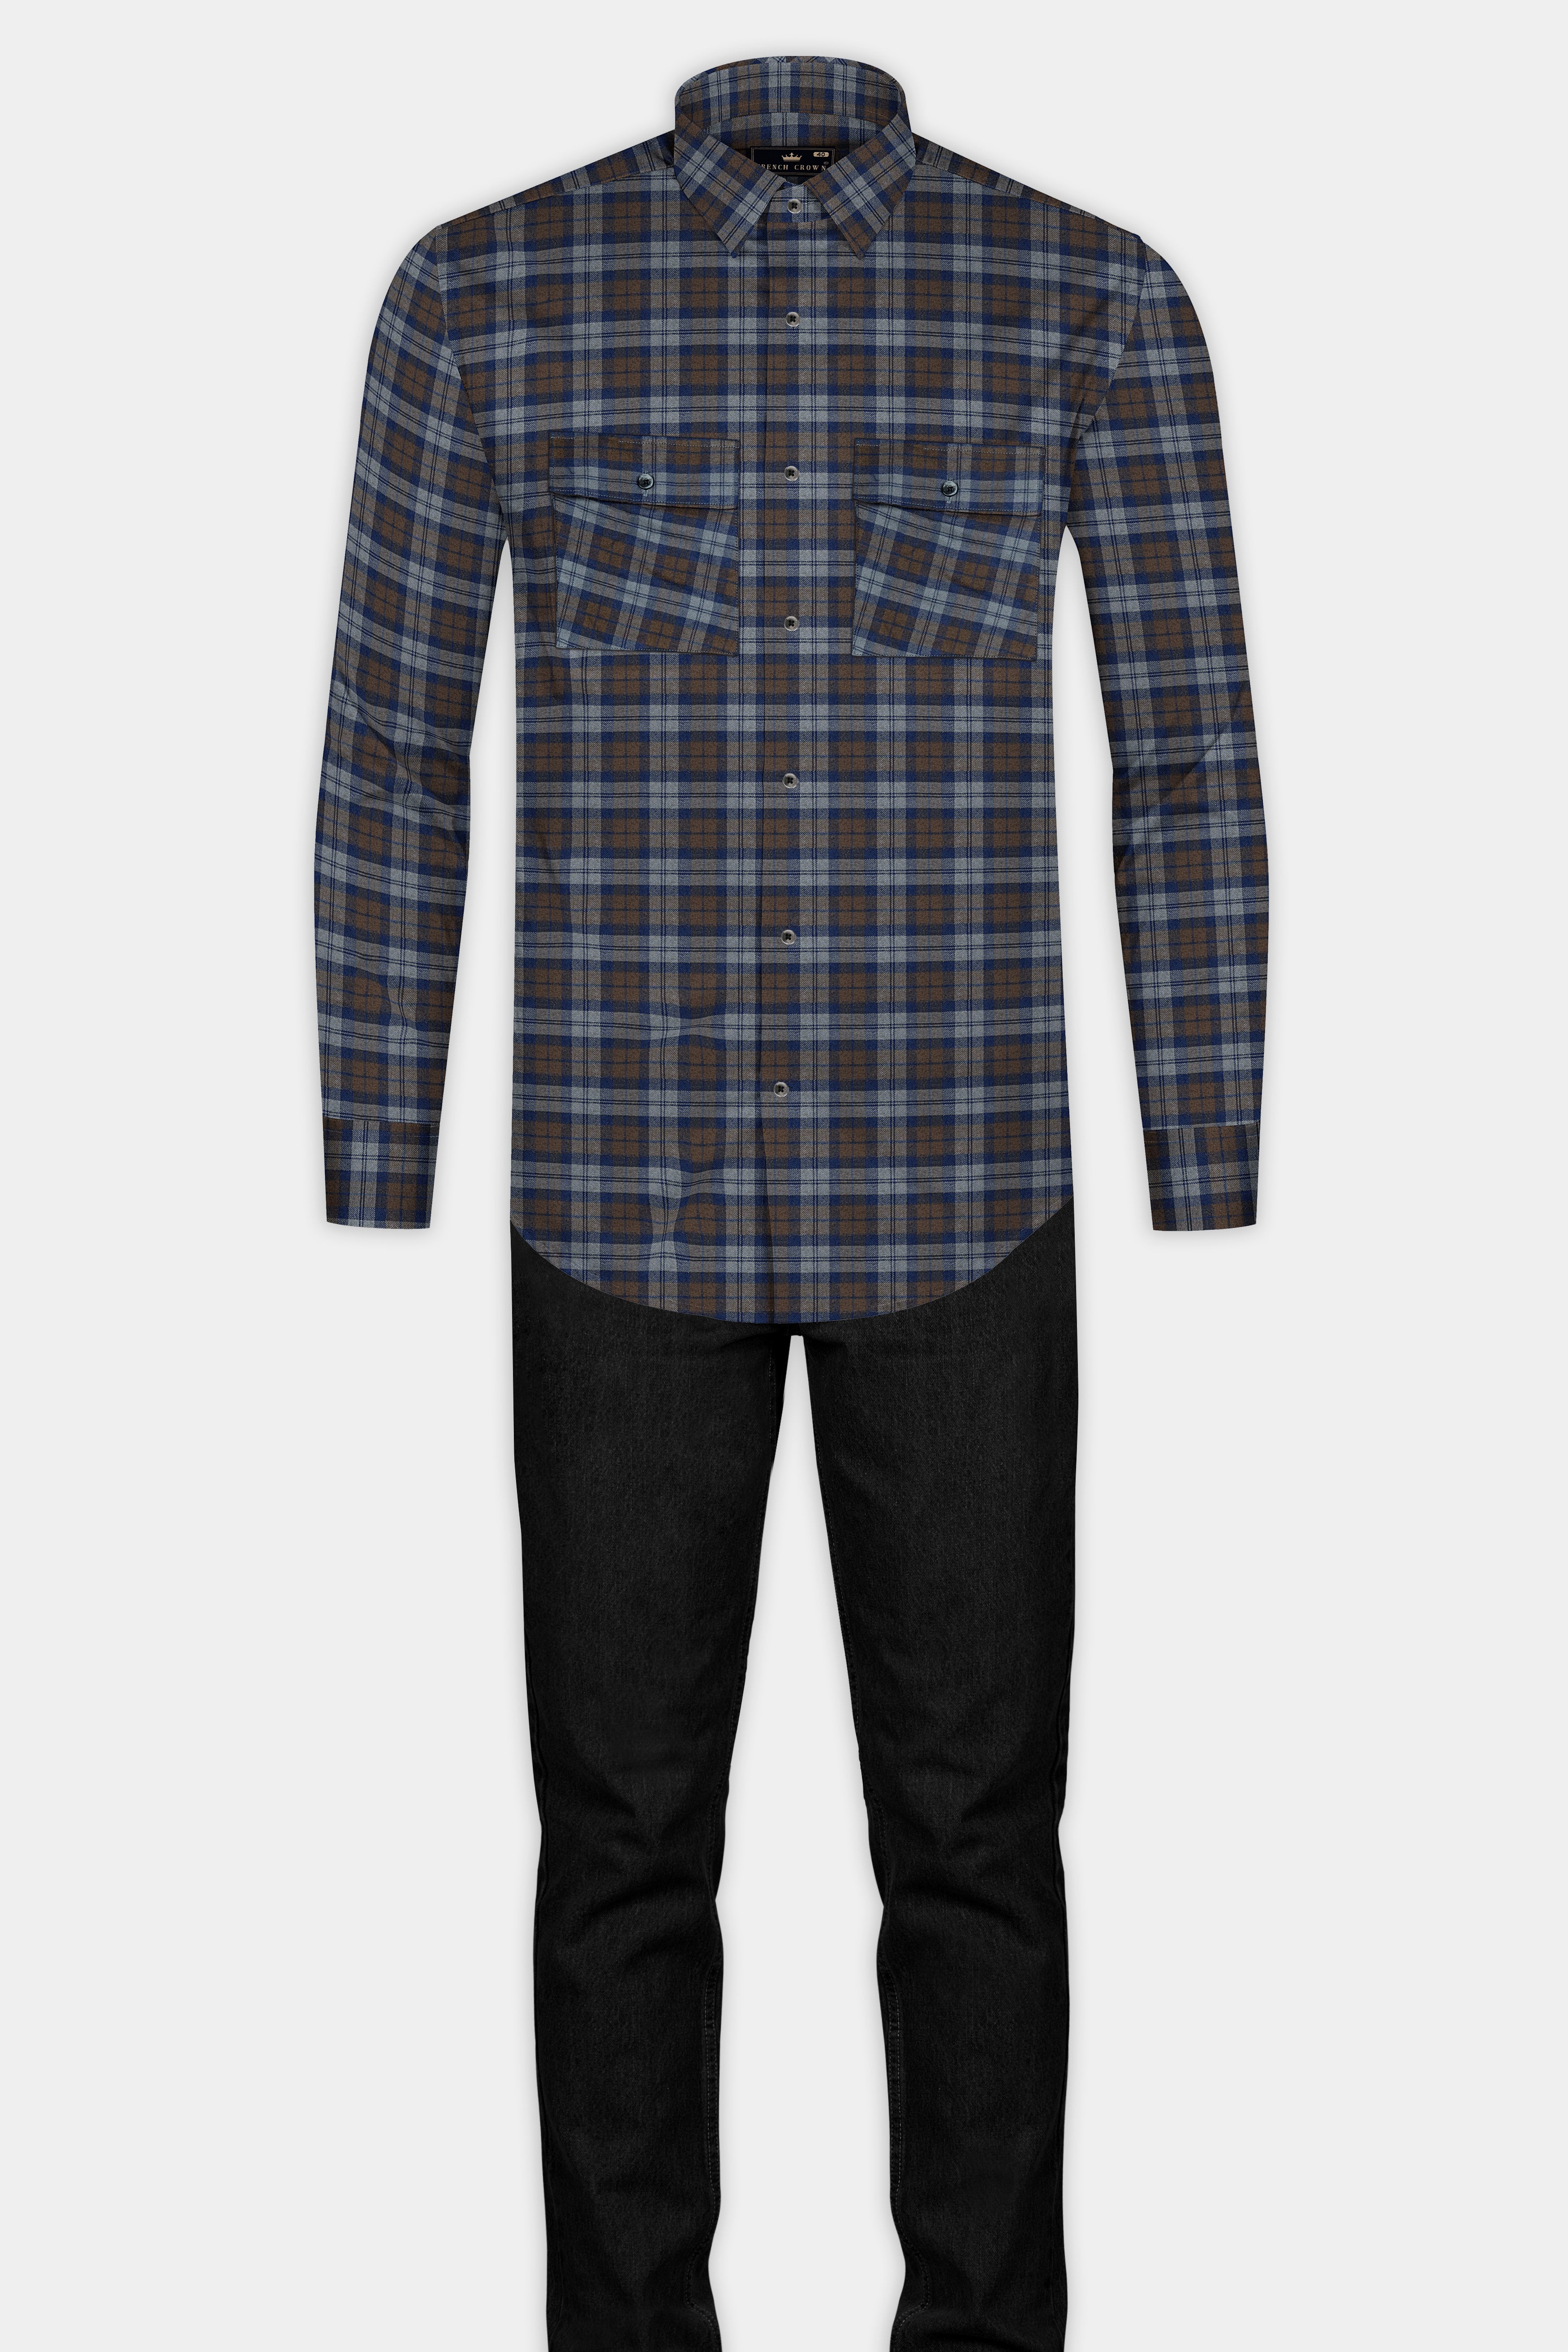 Iroko Brown With Firefly Plaid Twill Cotton Shirt